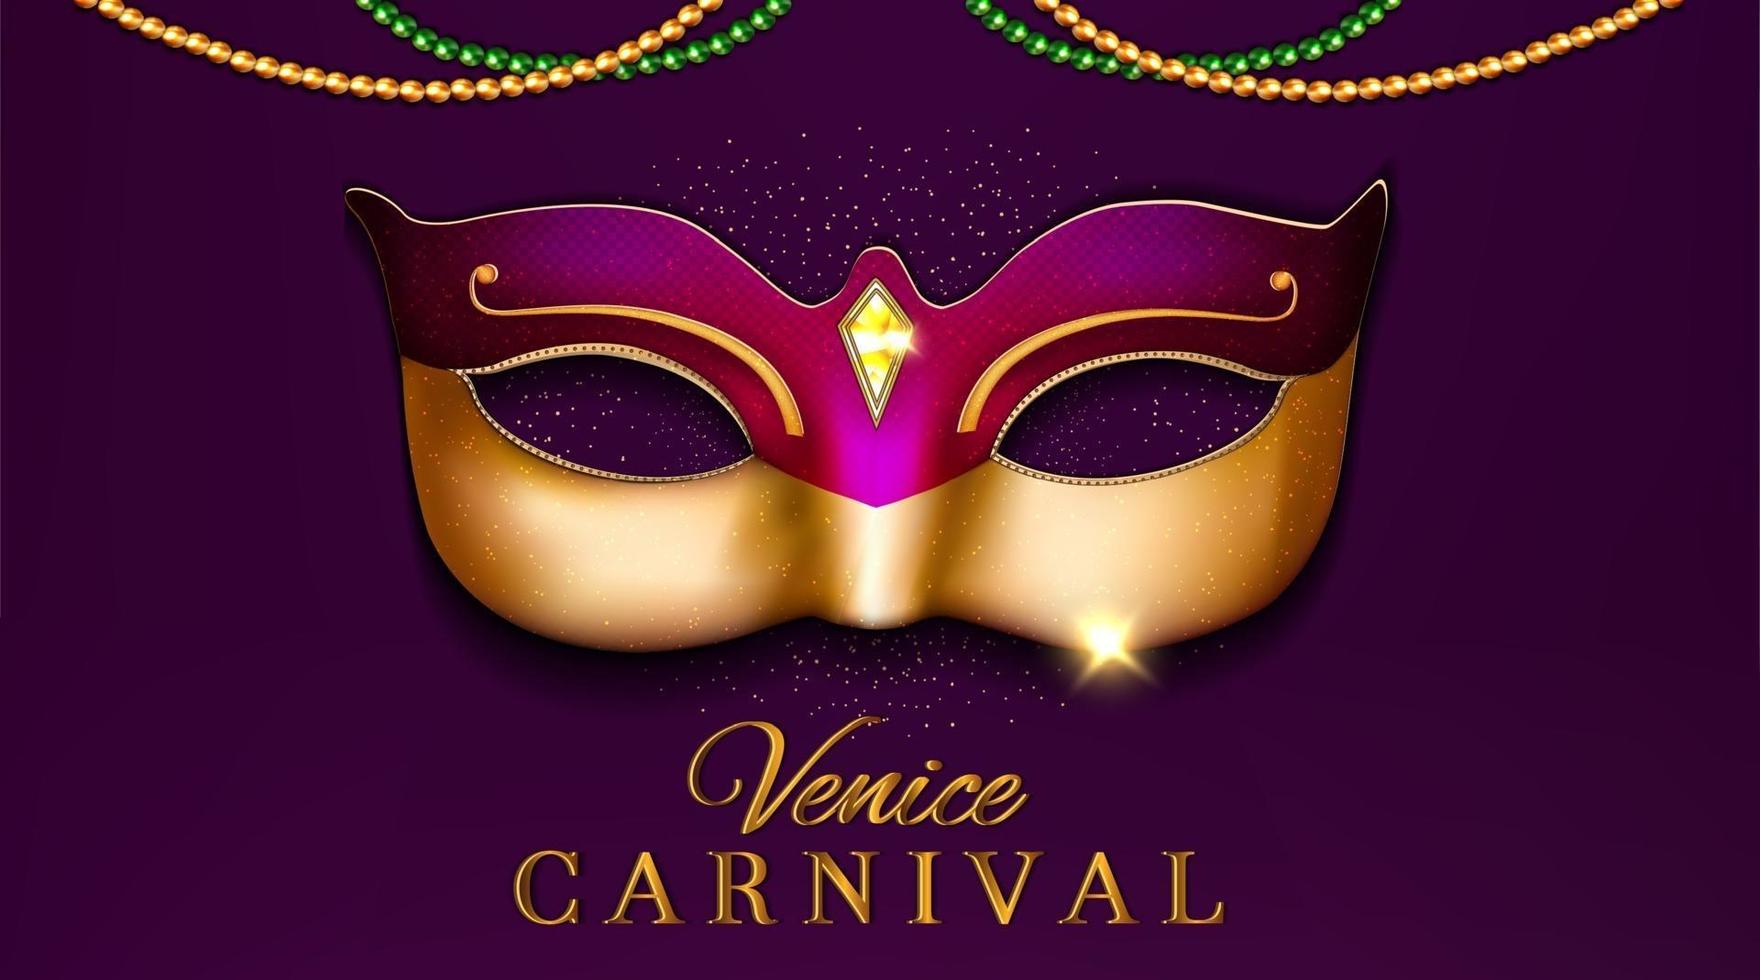 luxury venice carnival party design with mask 3d illustration vector